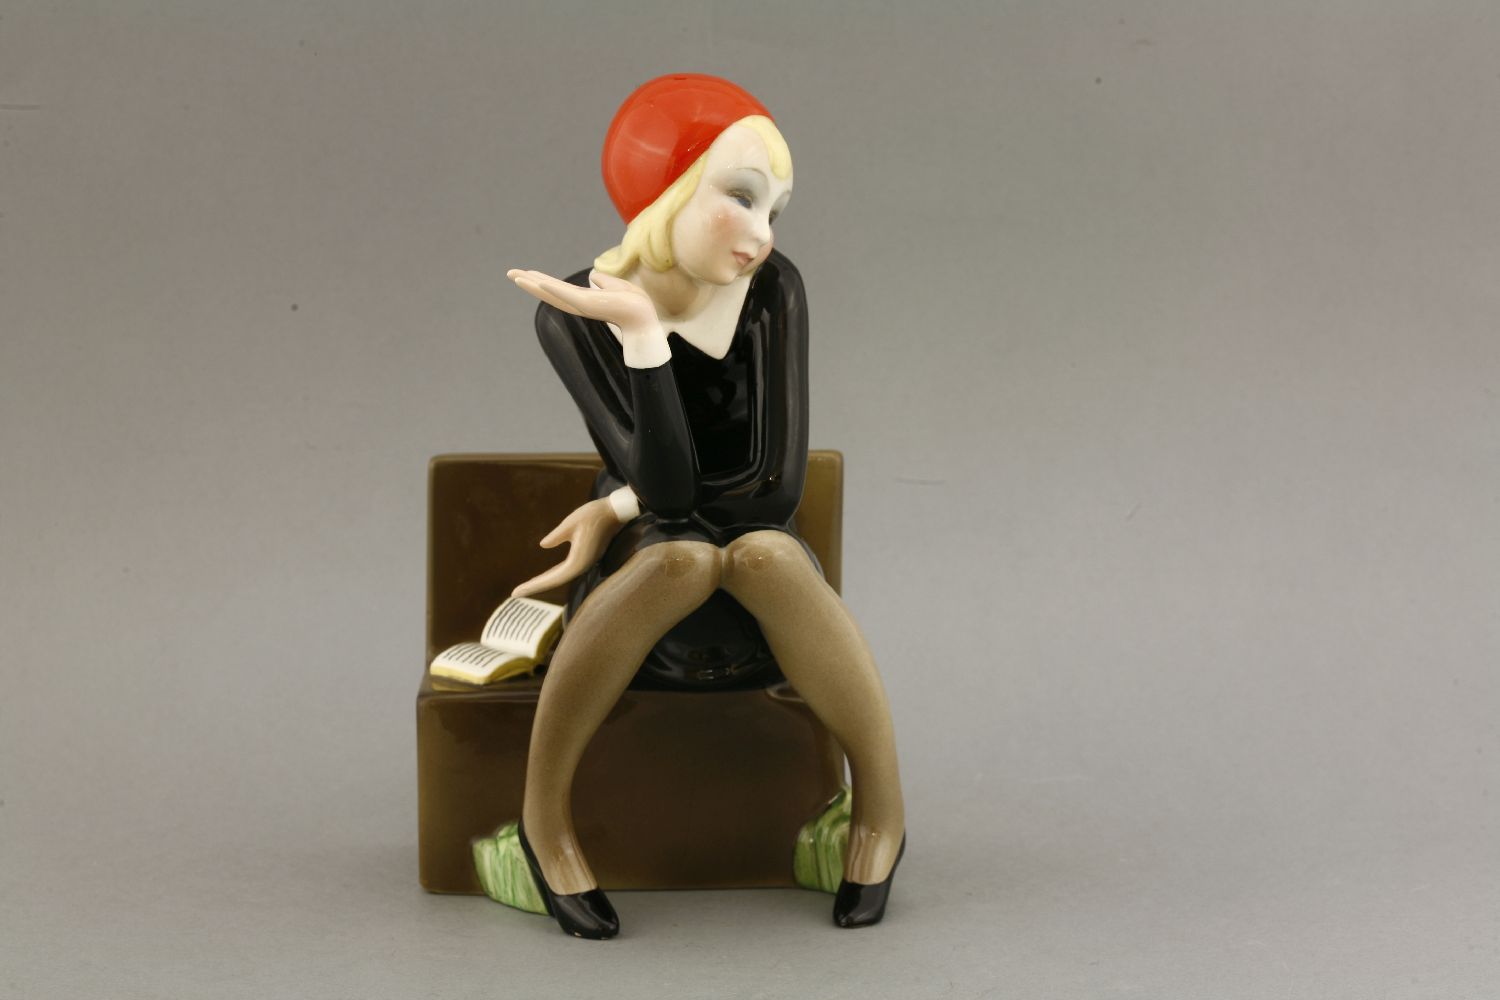 A Lenci figure,'Nella', modelled by Helen Koenig Scavini, modelled as a girl seated on a bench - Image 2 of 7